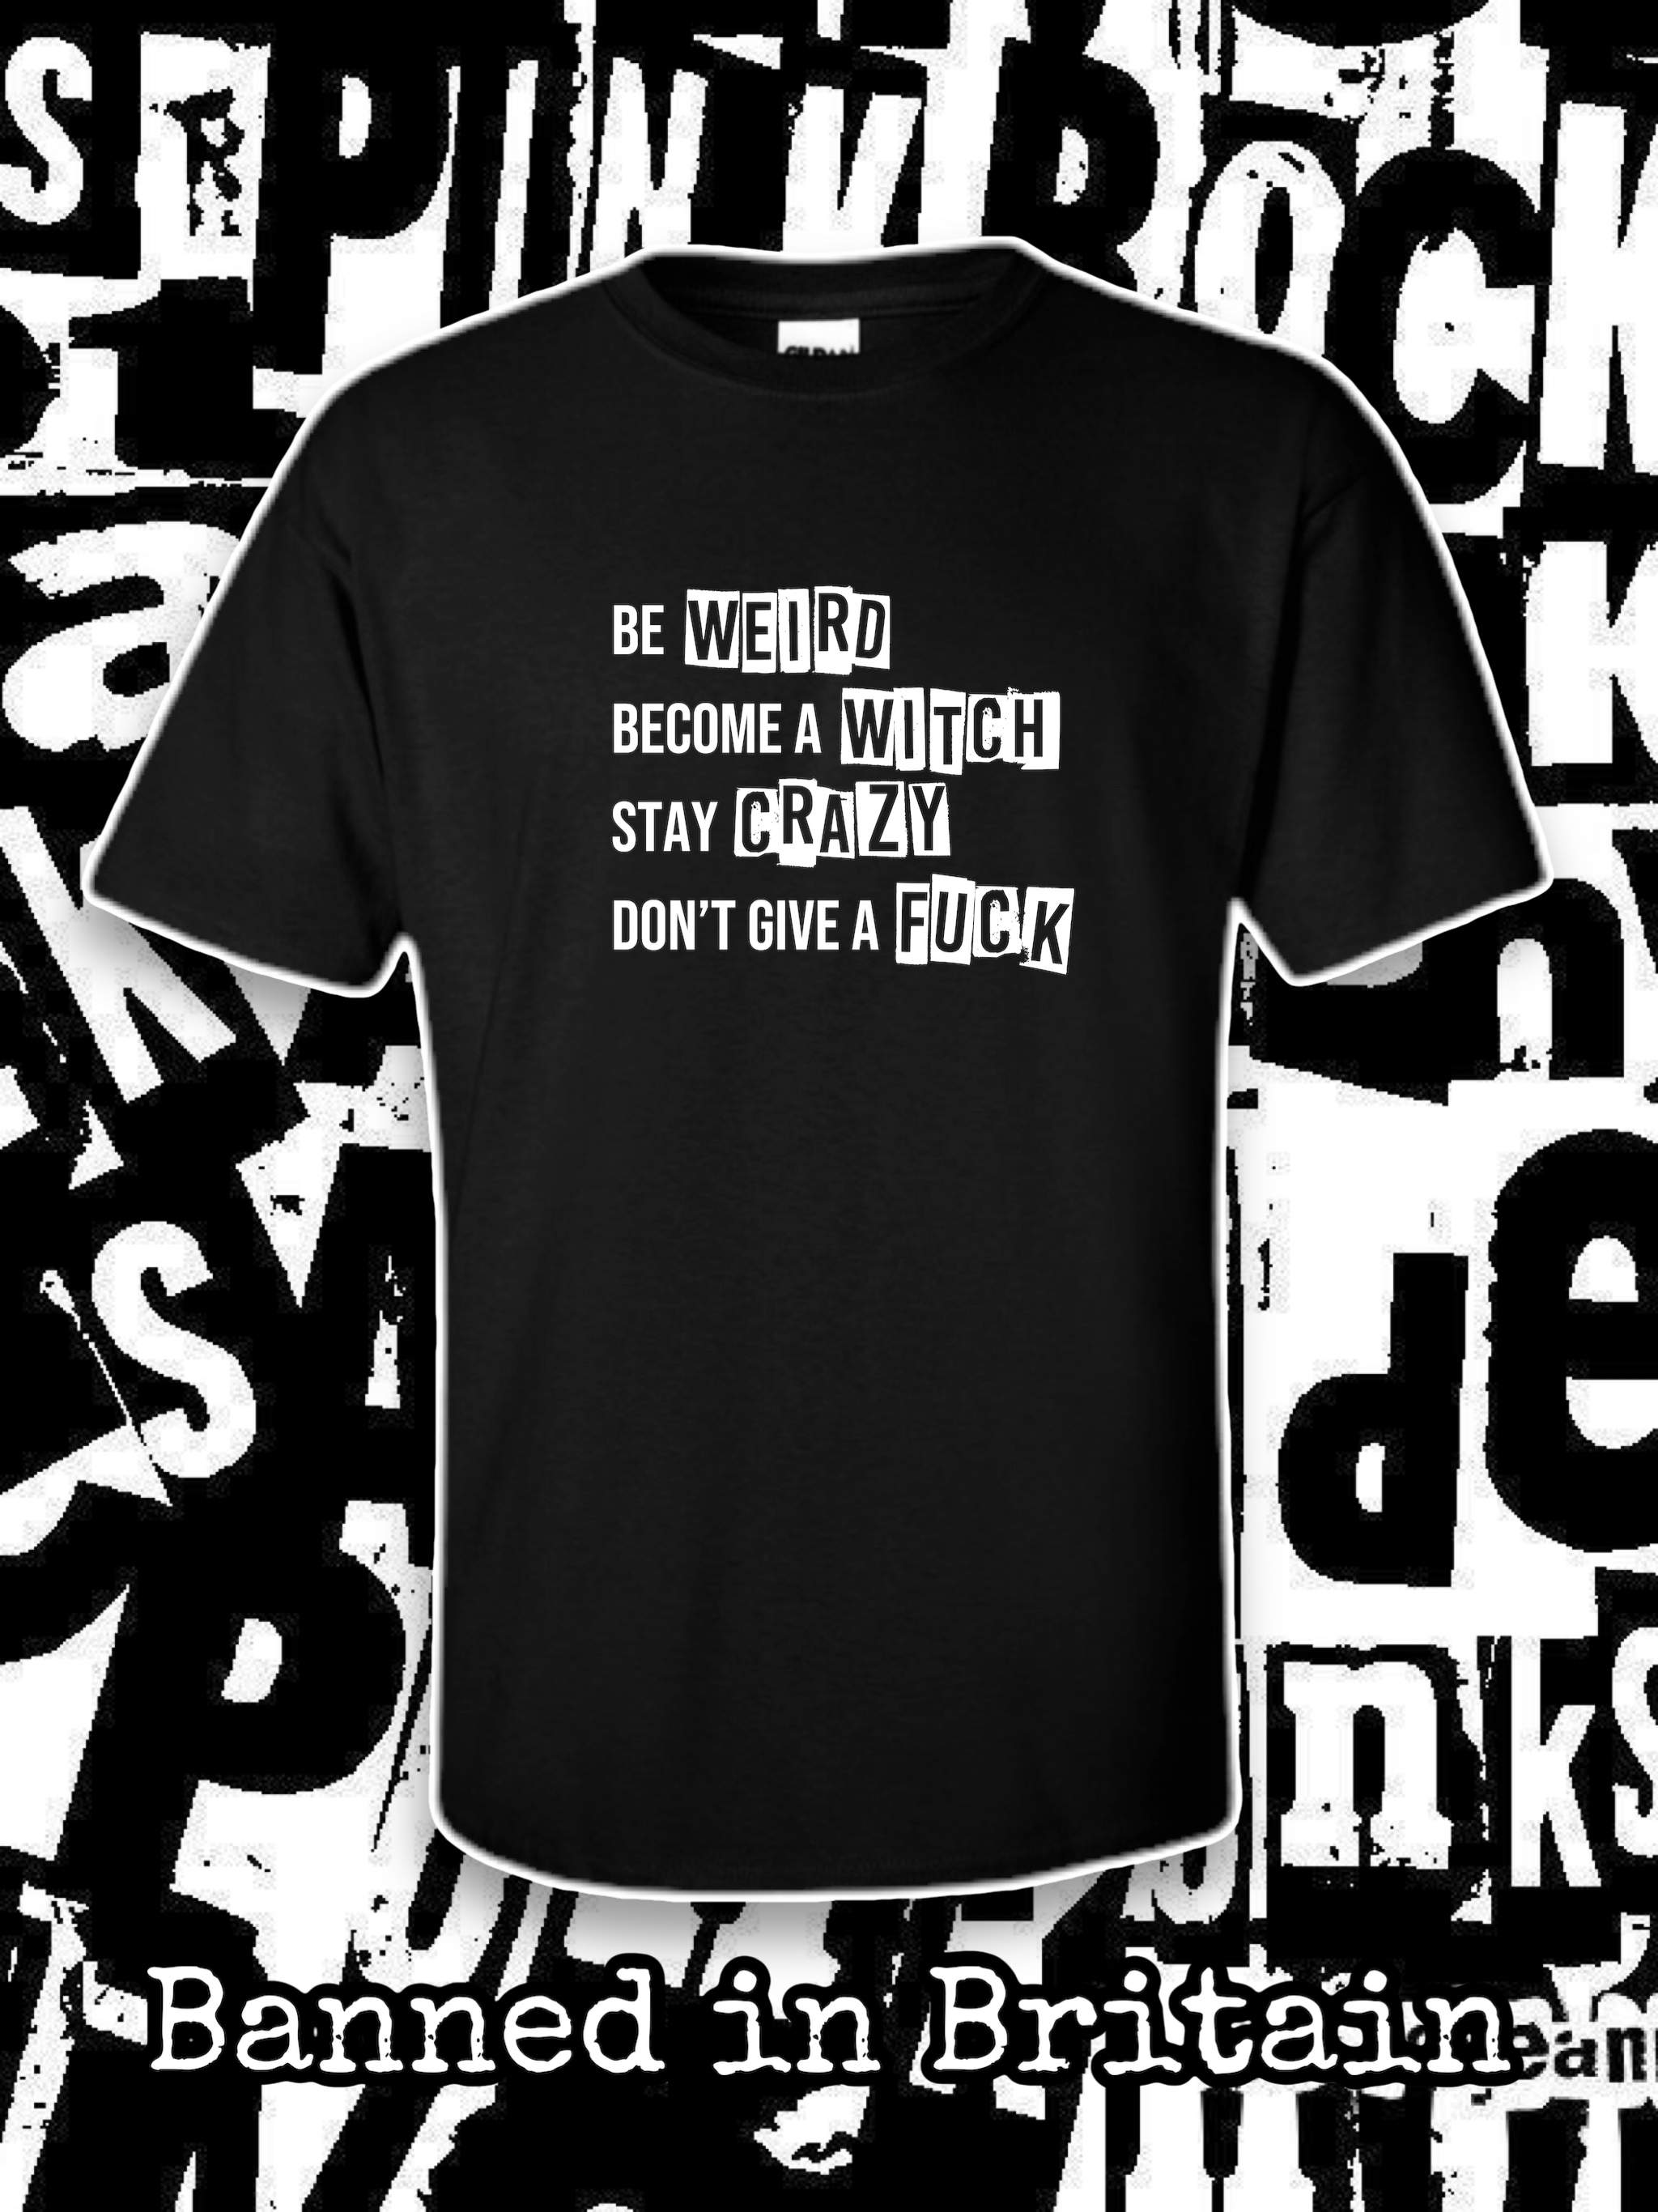 Be Weird Become a Witch Stay Crazy Don’t Give a Fuck T-shirt